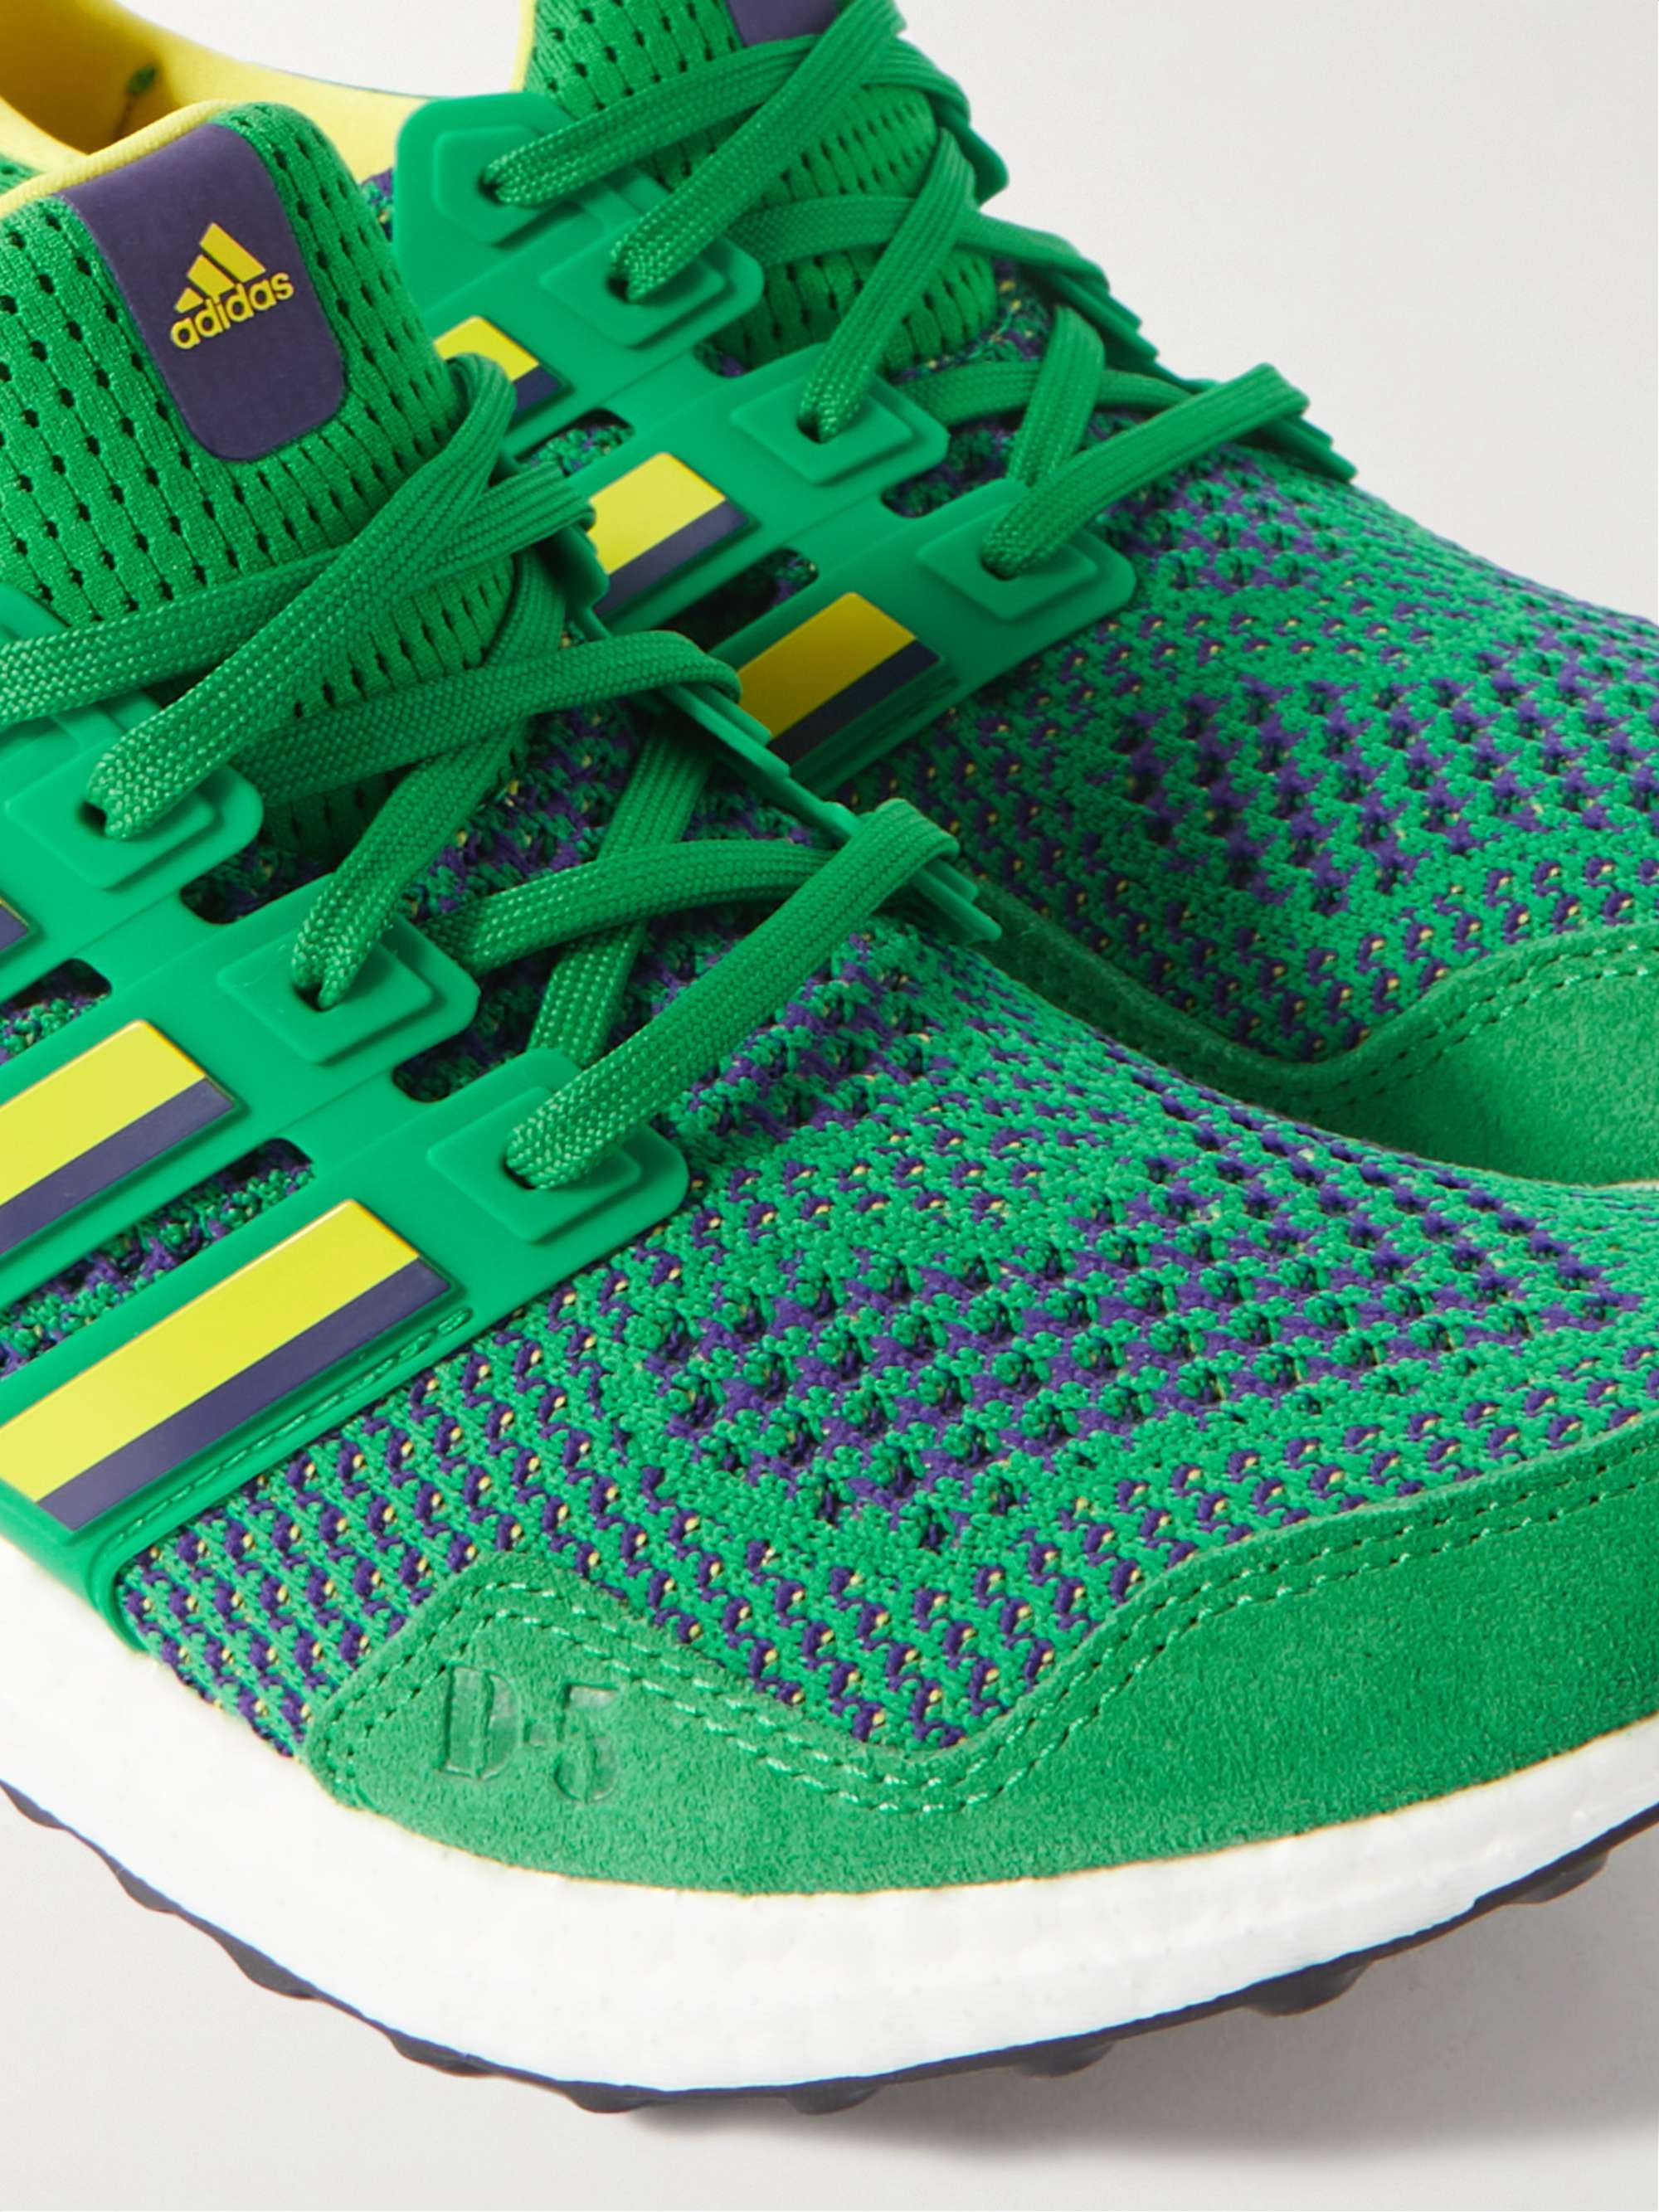 ADIDAS SPORT + The Mighty Ducks Ultraboost 1.0 Rubber-Trimmed Primeknit Running Sneakers